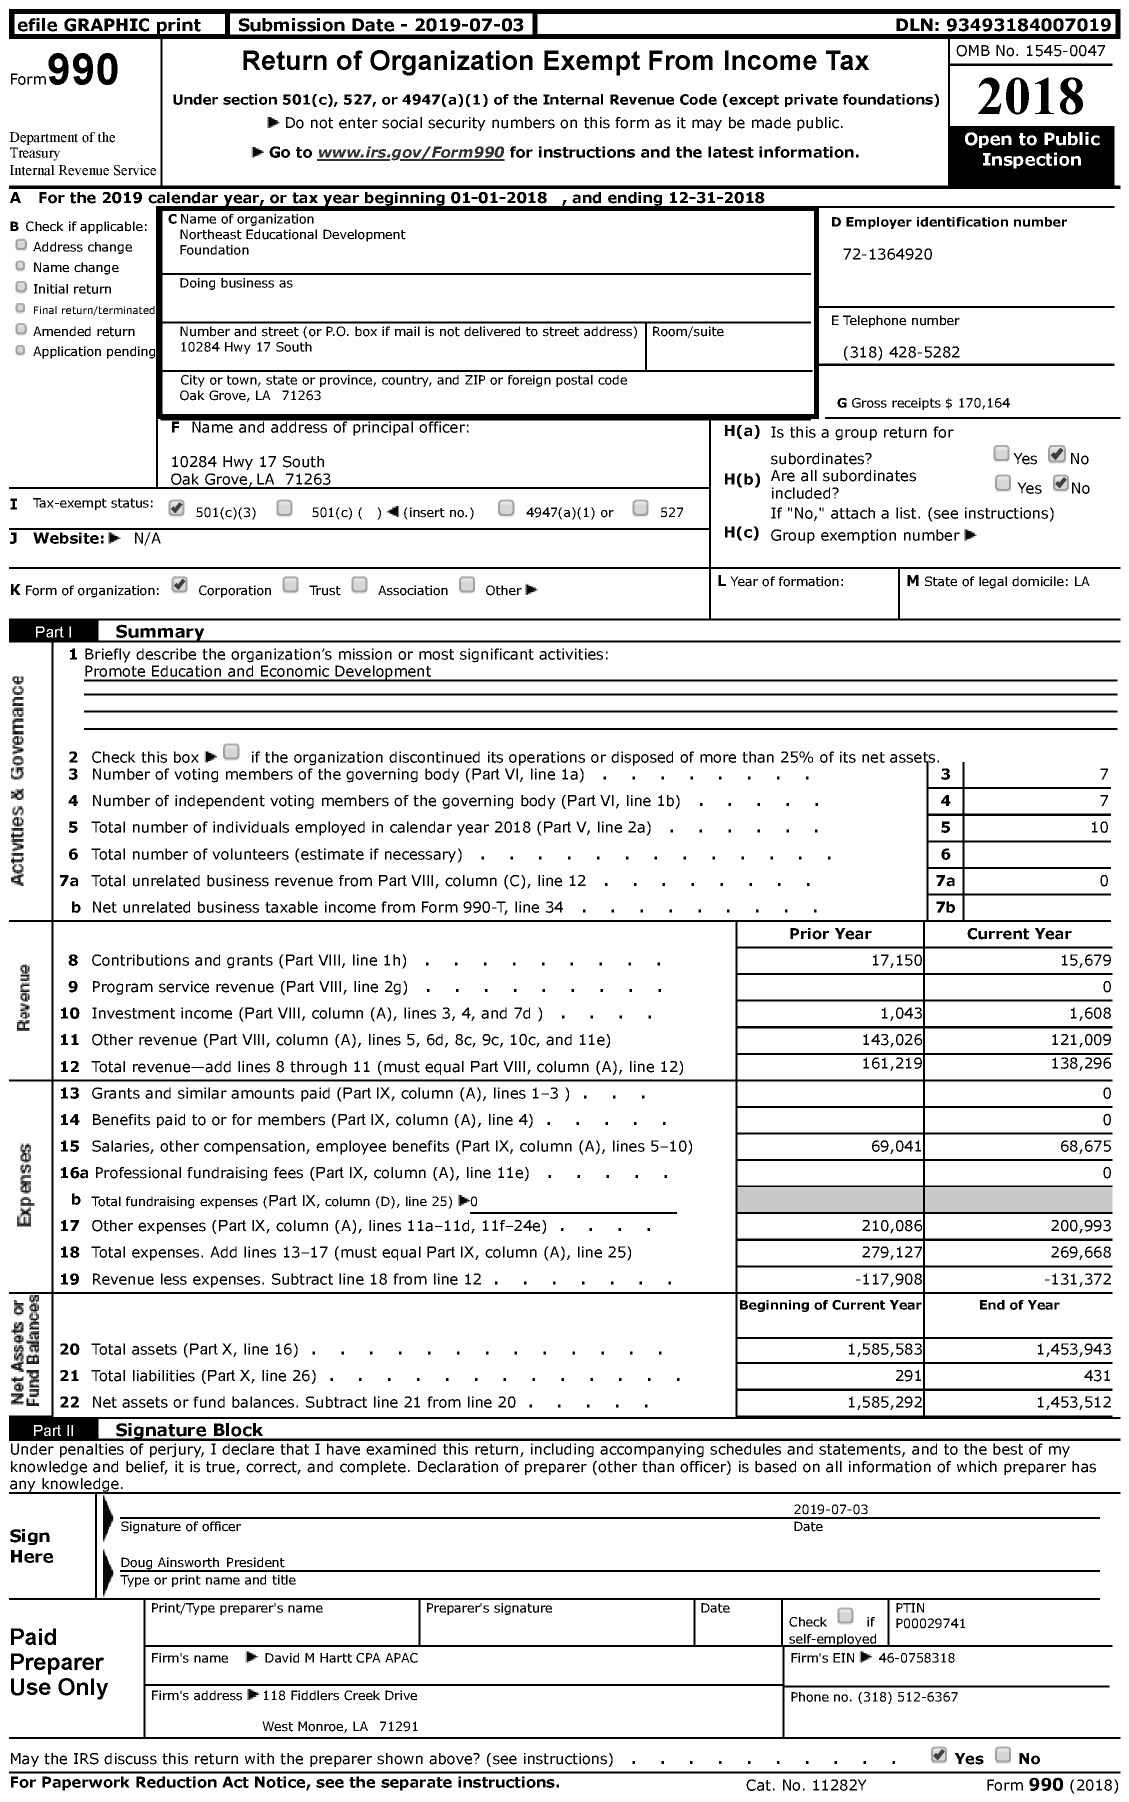 Image of first page of 2018 Form 990 for Northeast Educational Development Foundation